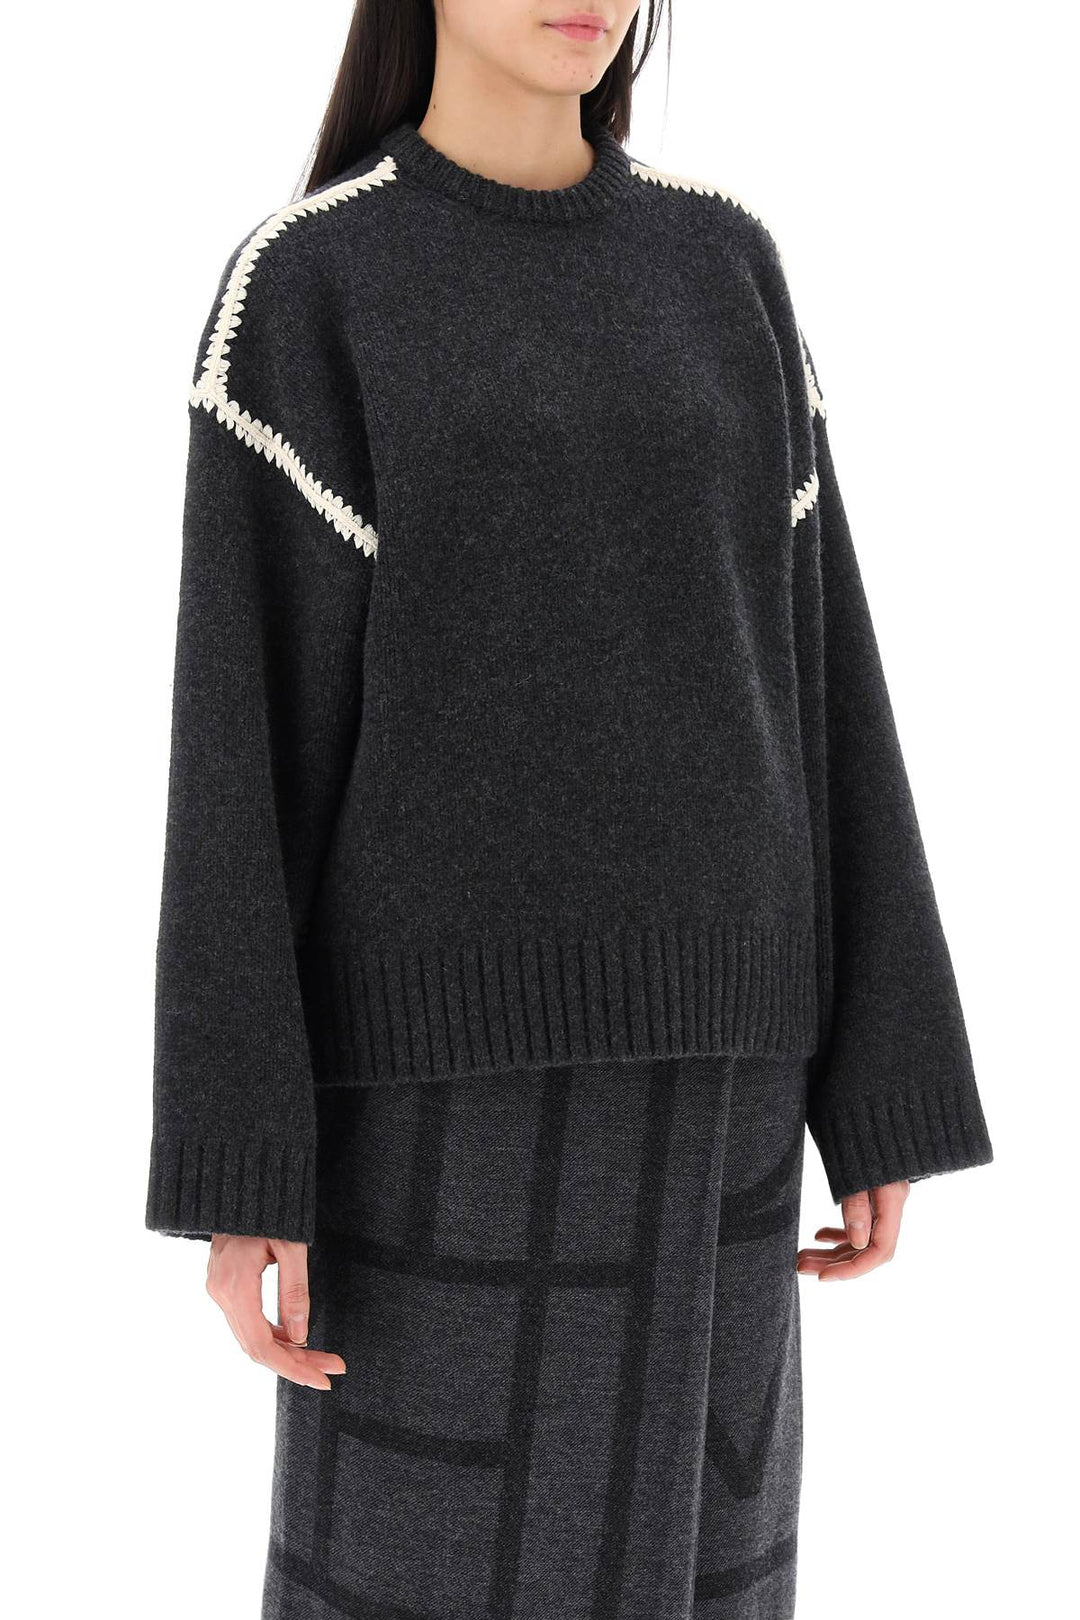 Toteme Sweater With Contrast Embroideries   Grigio